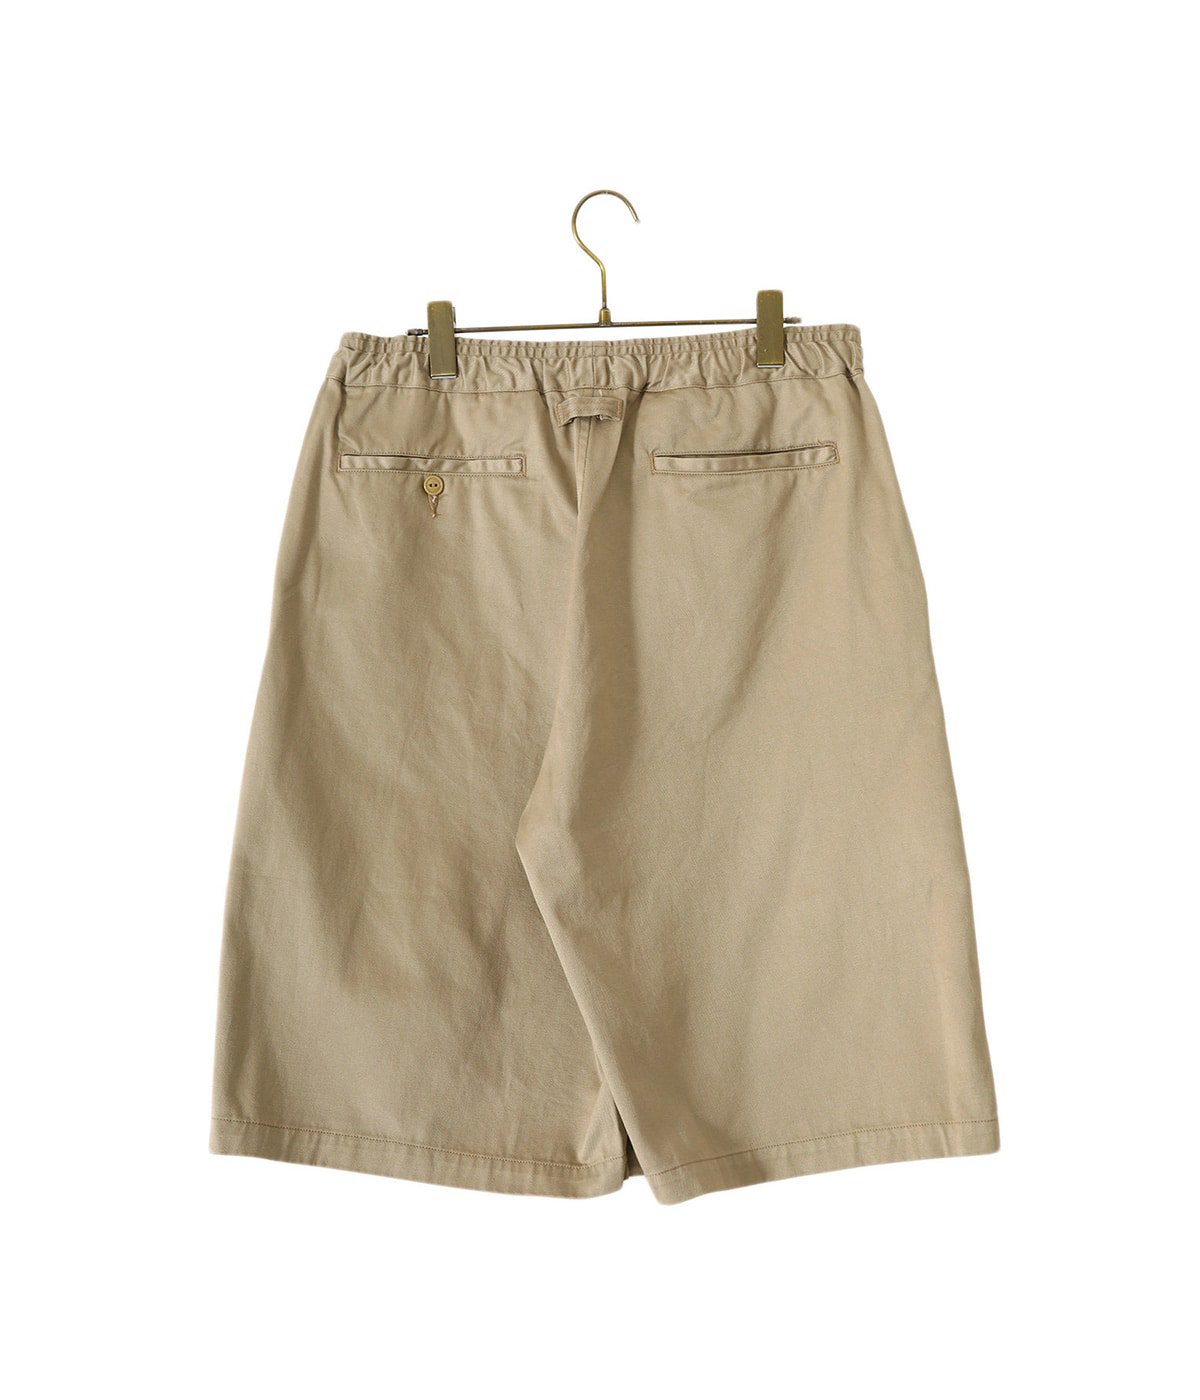 SELVEDGE WEAPON EASY WIDE SHORTS